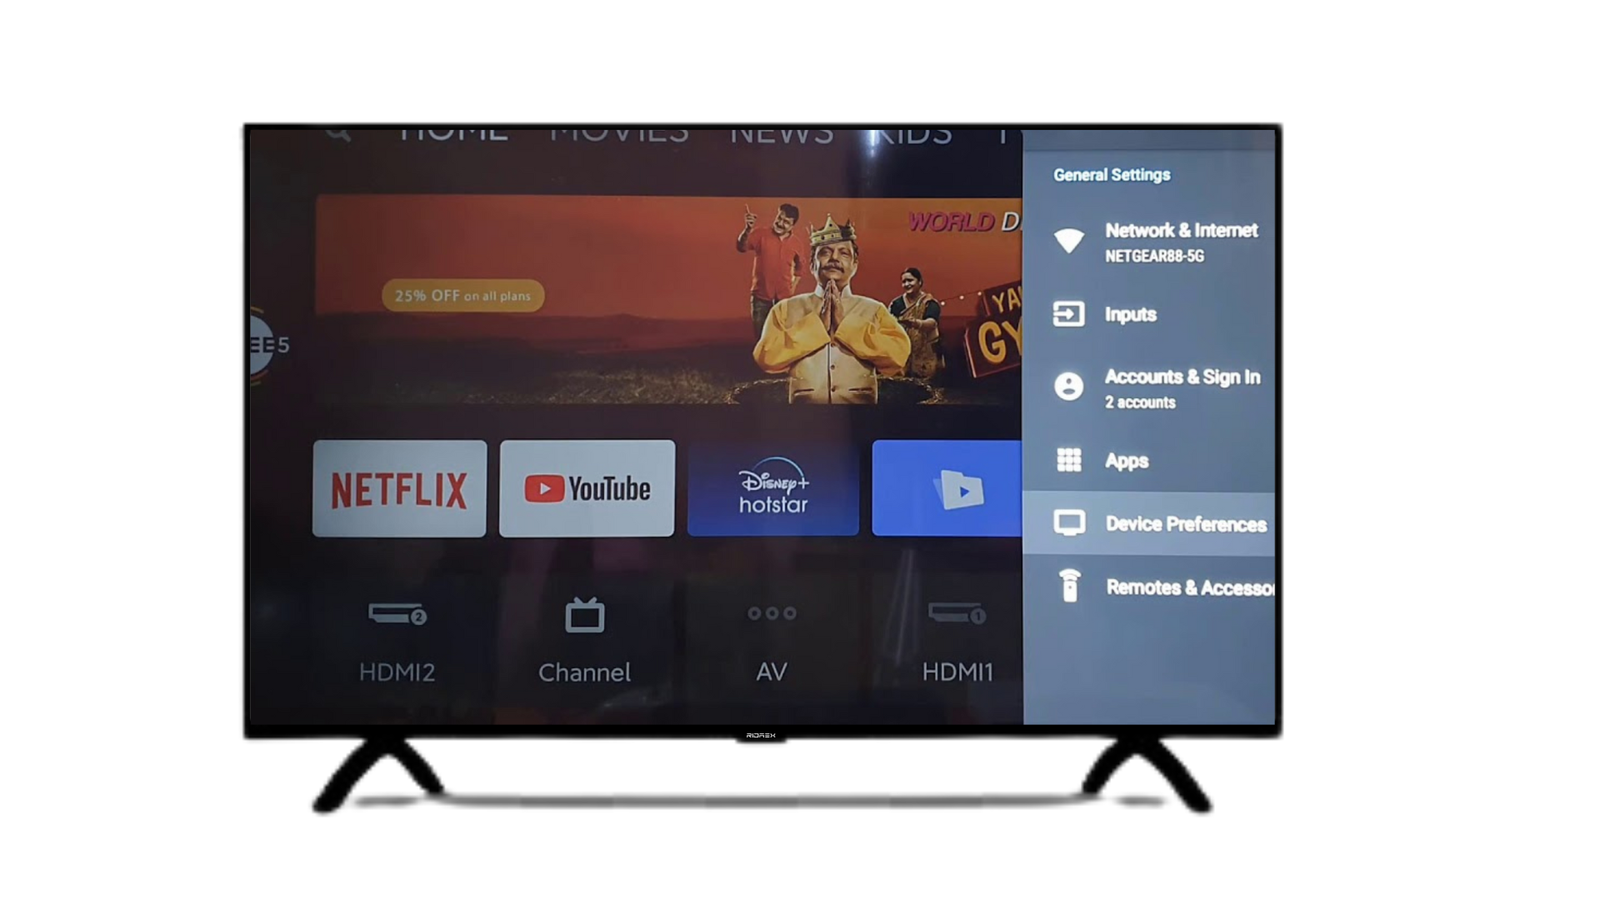 Why is a Smart TV System Update required and how to do it?